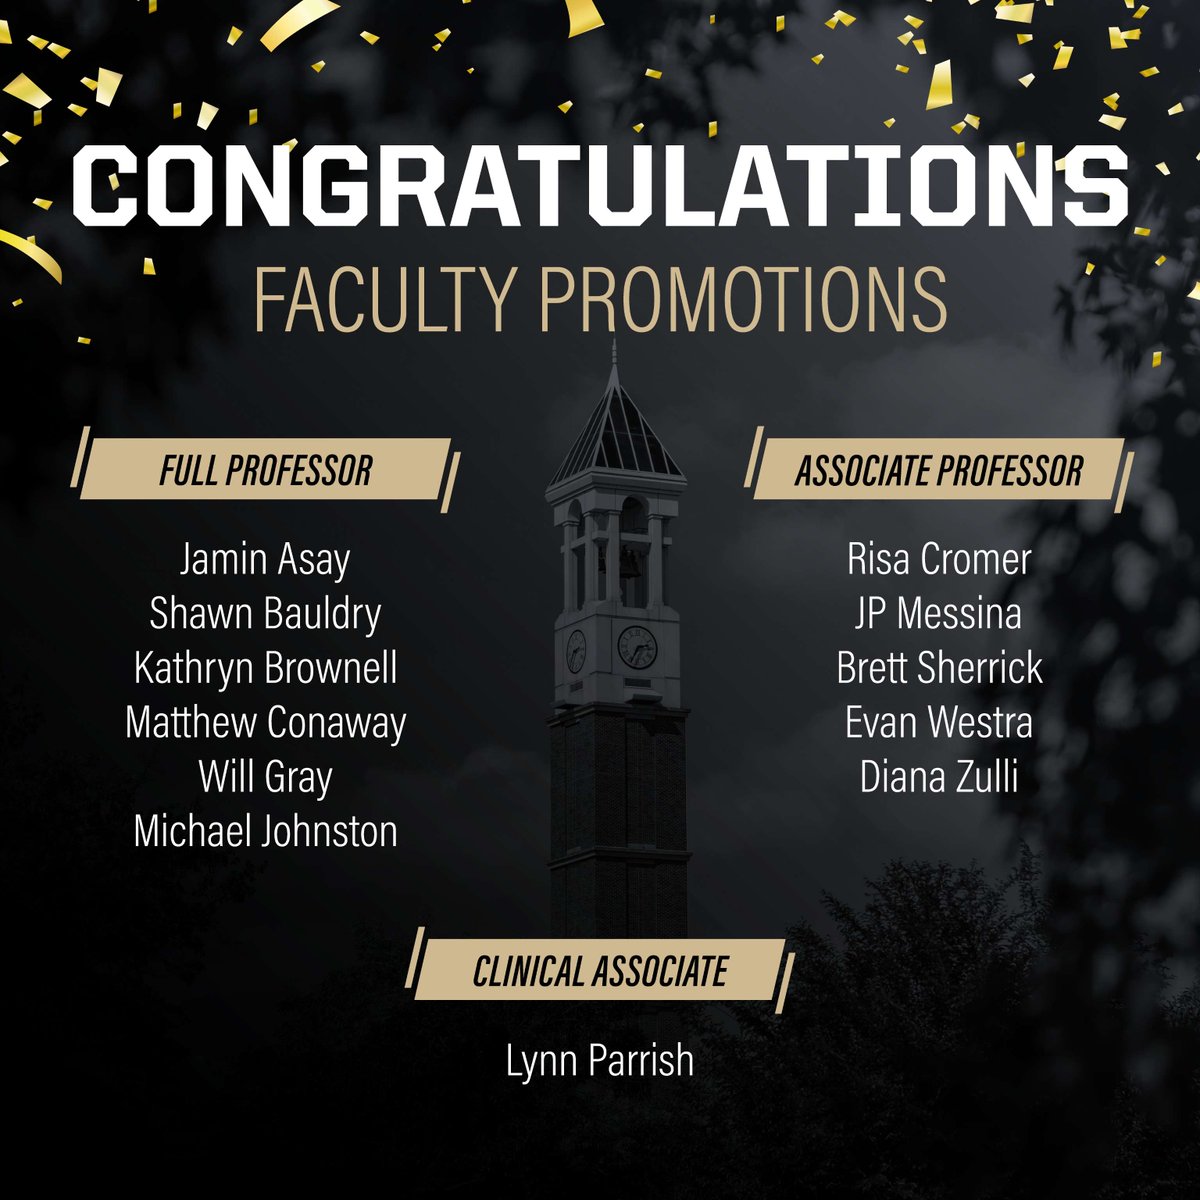 Join us in congratulating these exceptional faculty whose cutting-edge research, passion for education, & academic service have strengthened #liberalarts at Purdue benefitting our students & programs year after year. Read more about these professors at: ow.ly/G6kZ50R7SqS